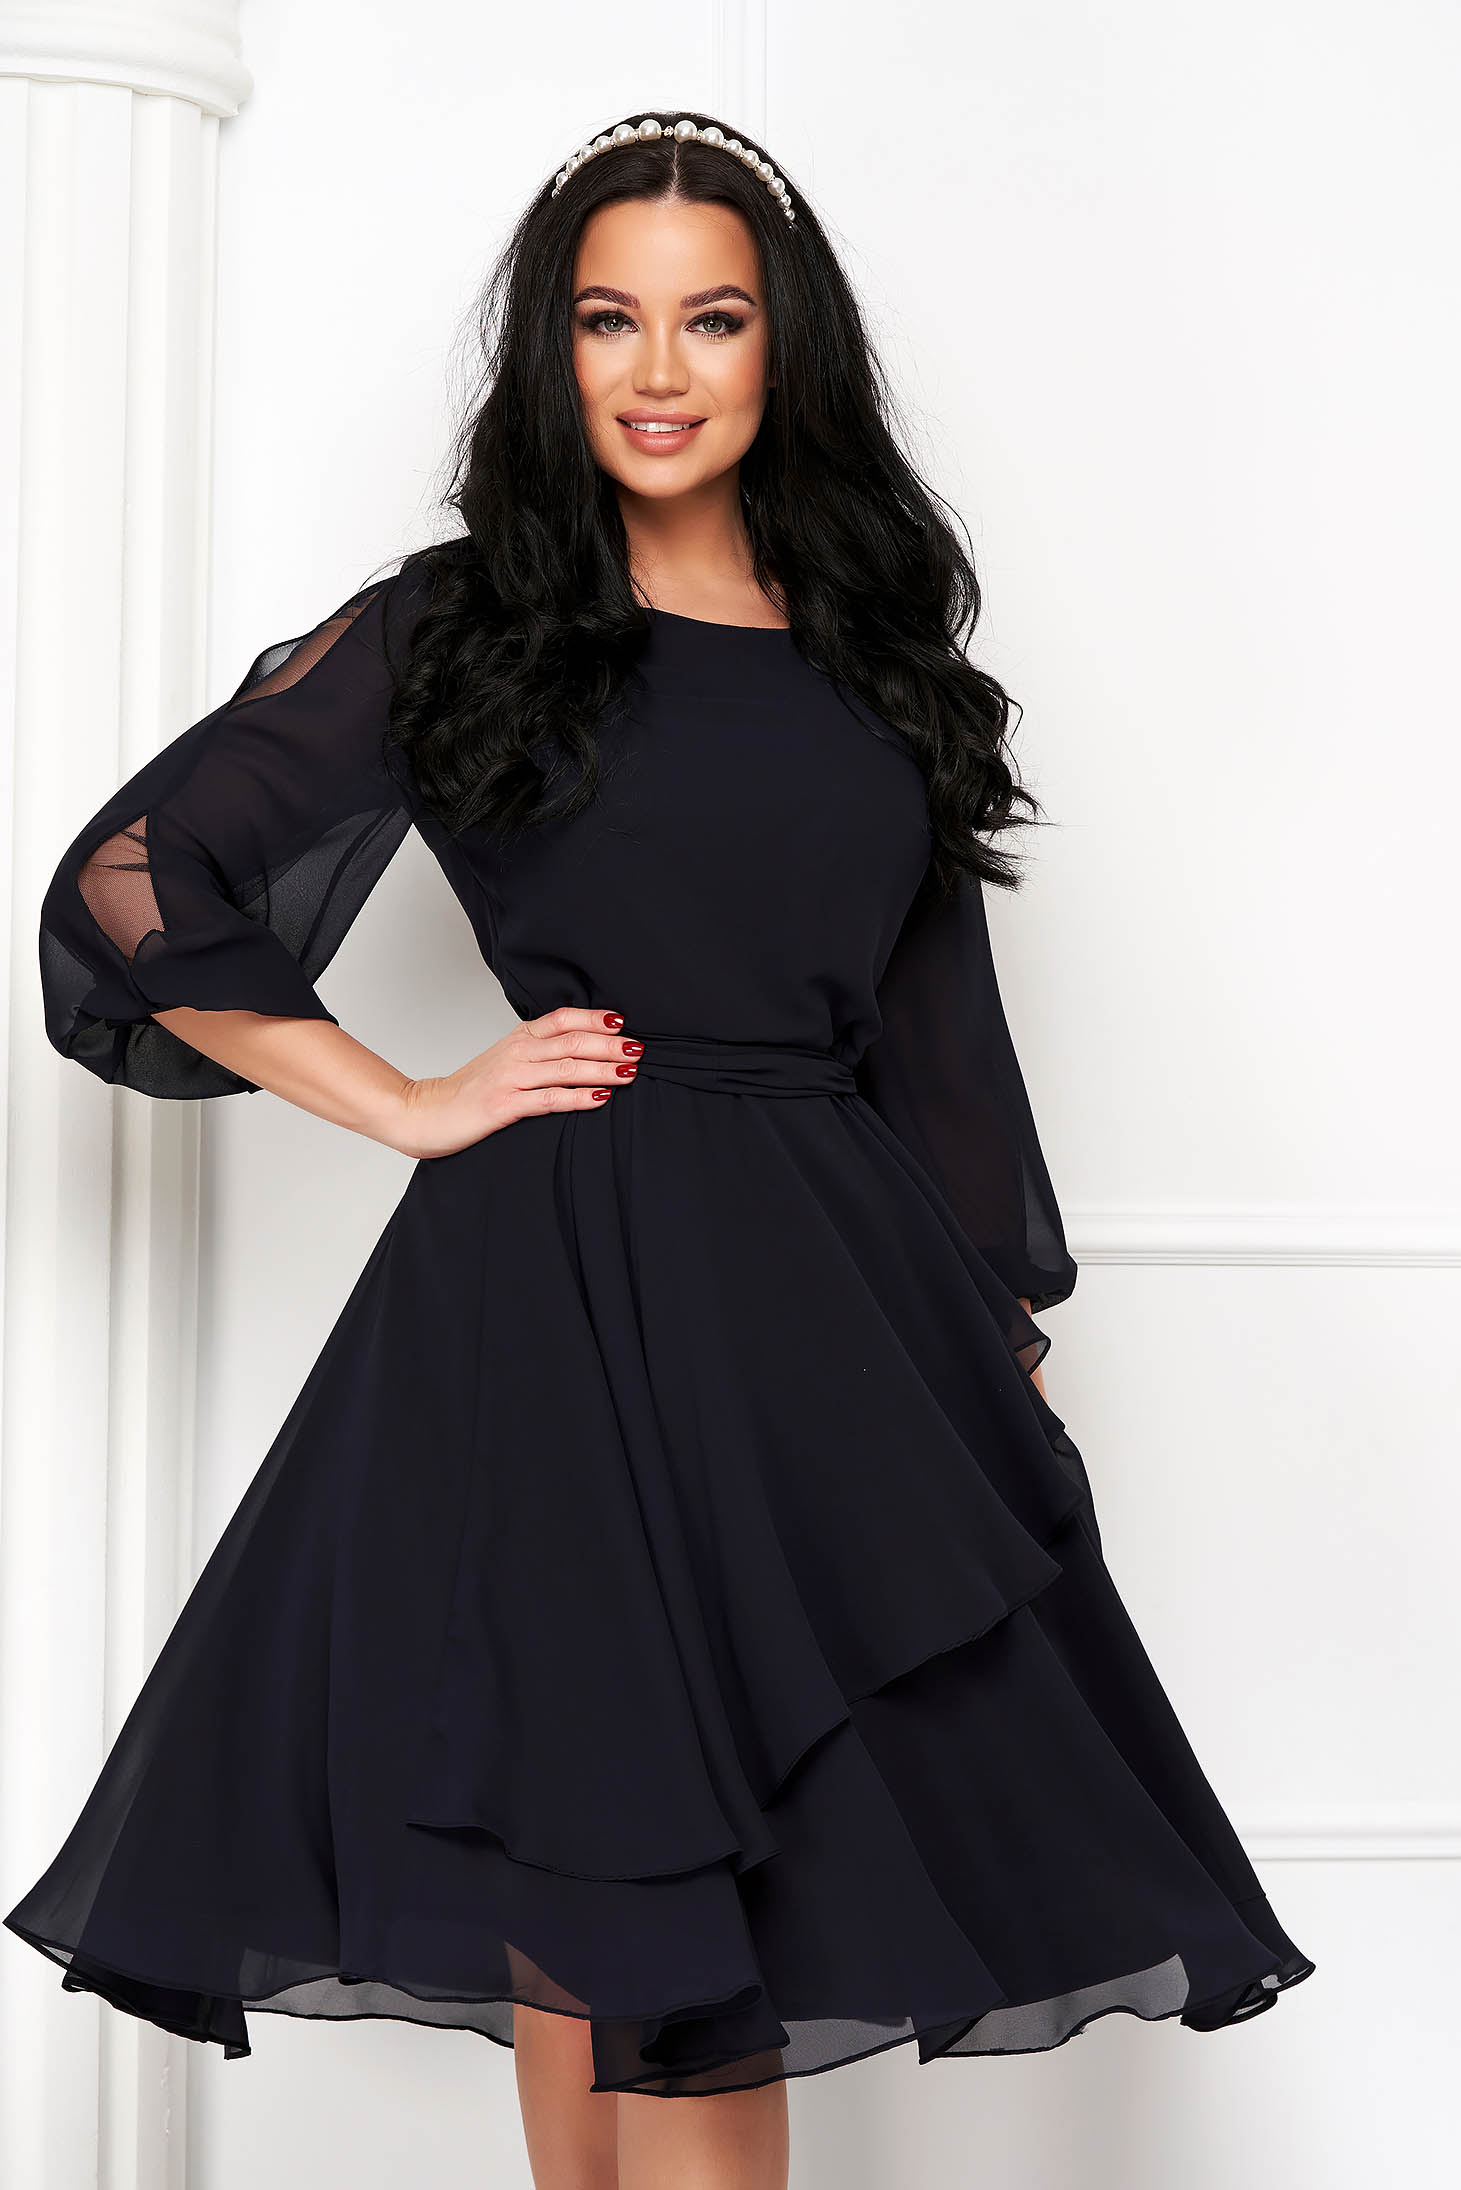 Black dress from veil fabric cloche with puffed sleeves with cut-out sleeves